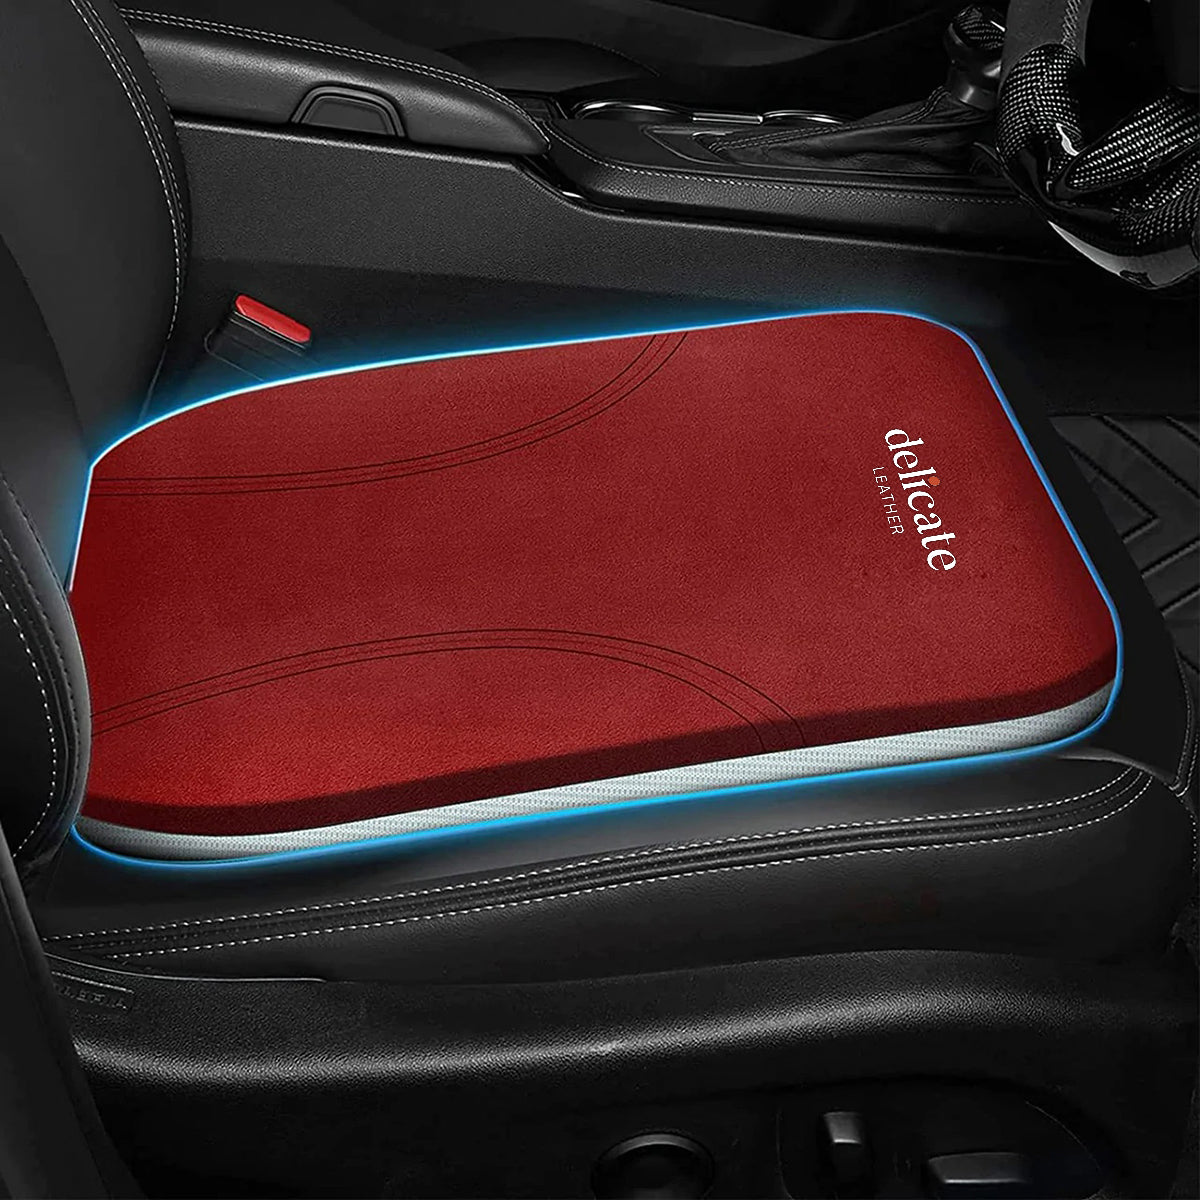 Lincoln Car Seat Cushion: Enhance Comfort and Support for Your Drive